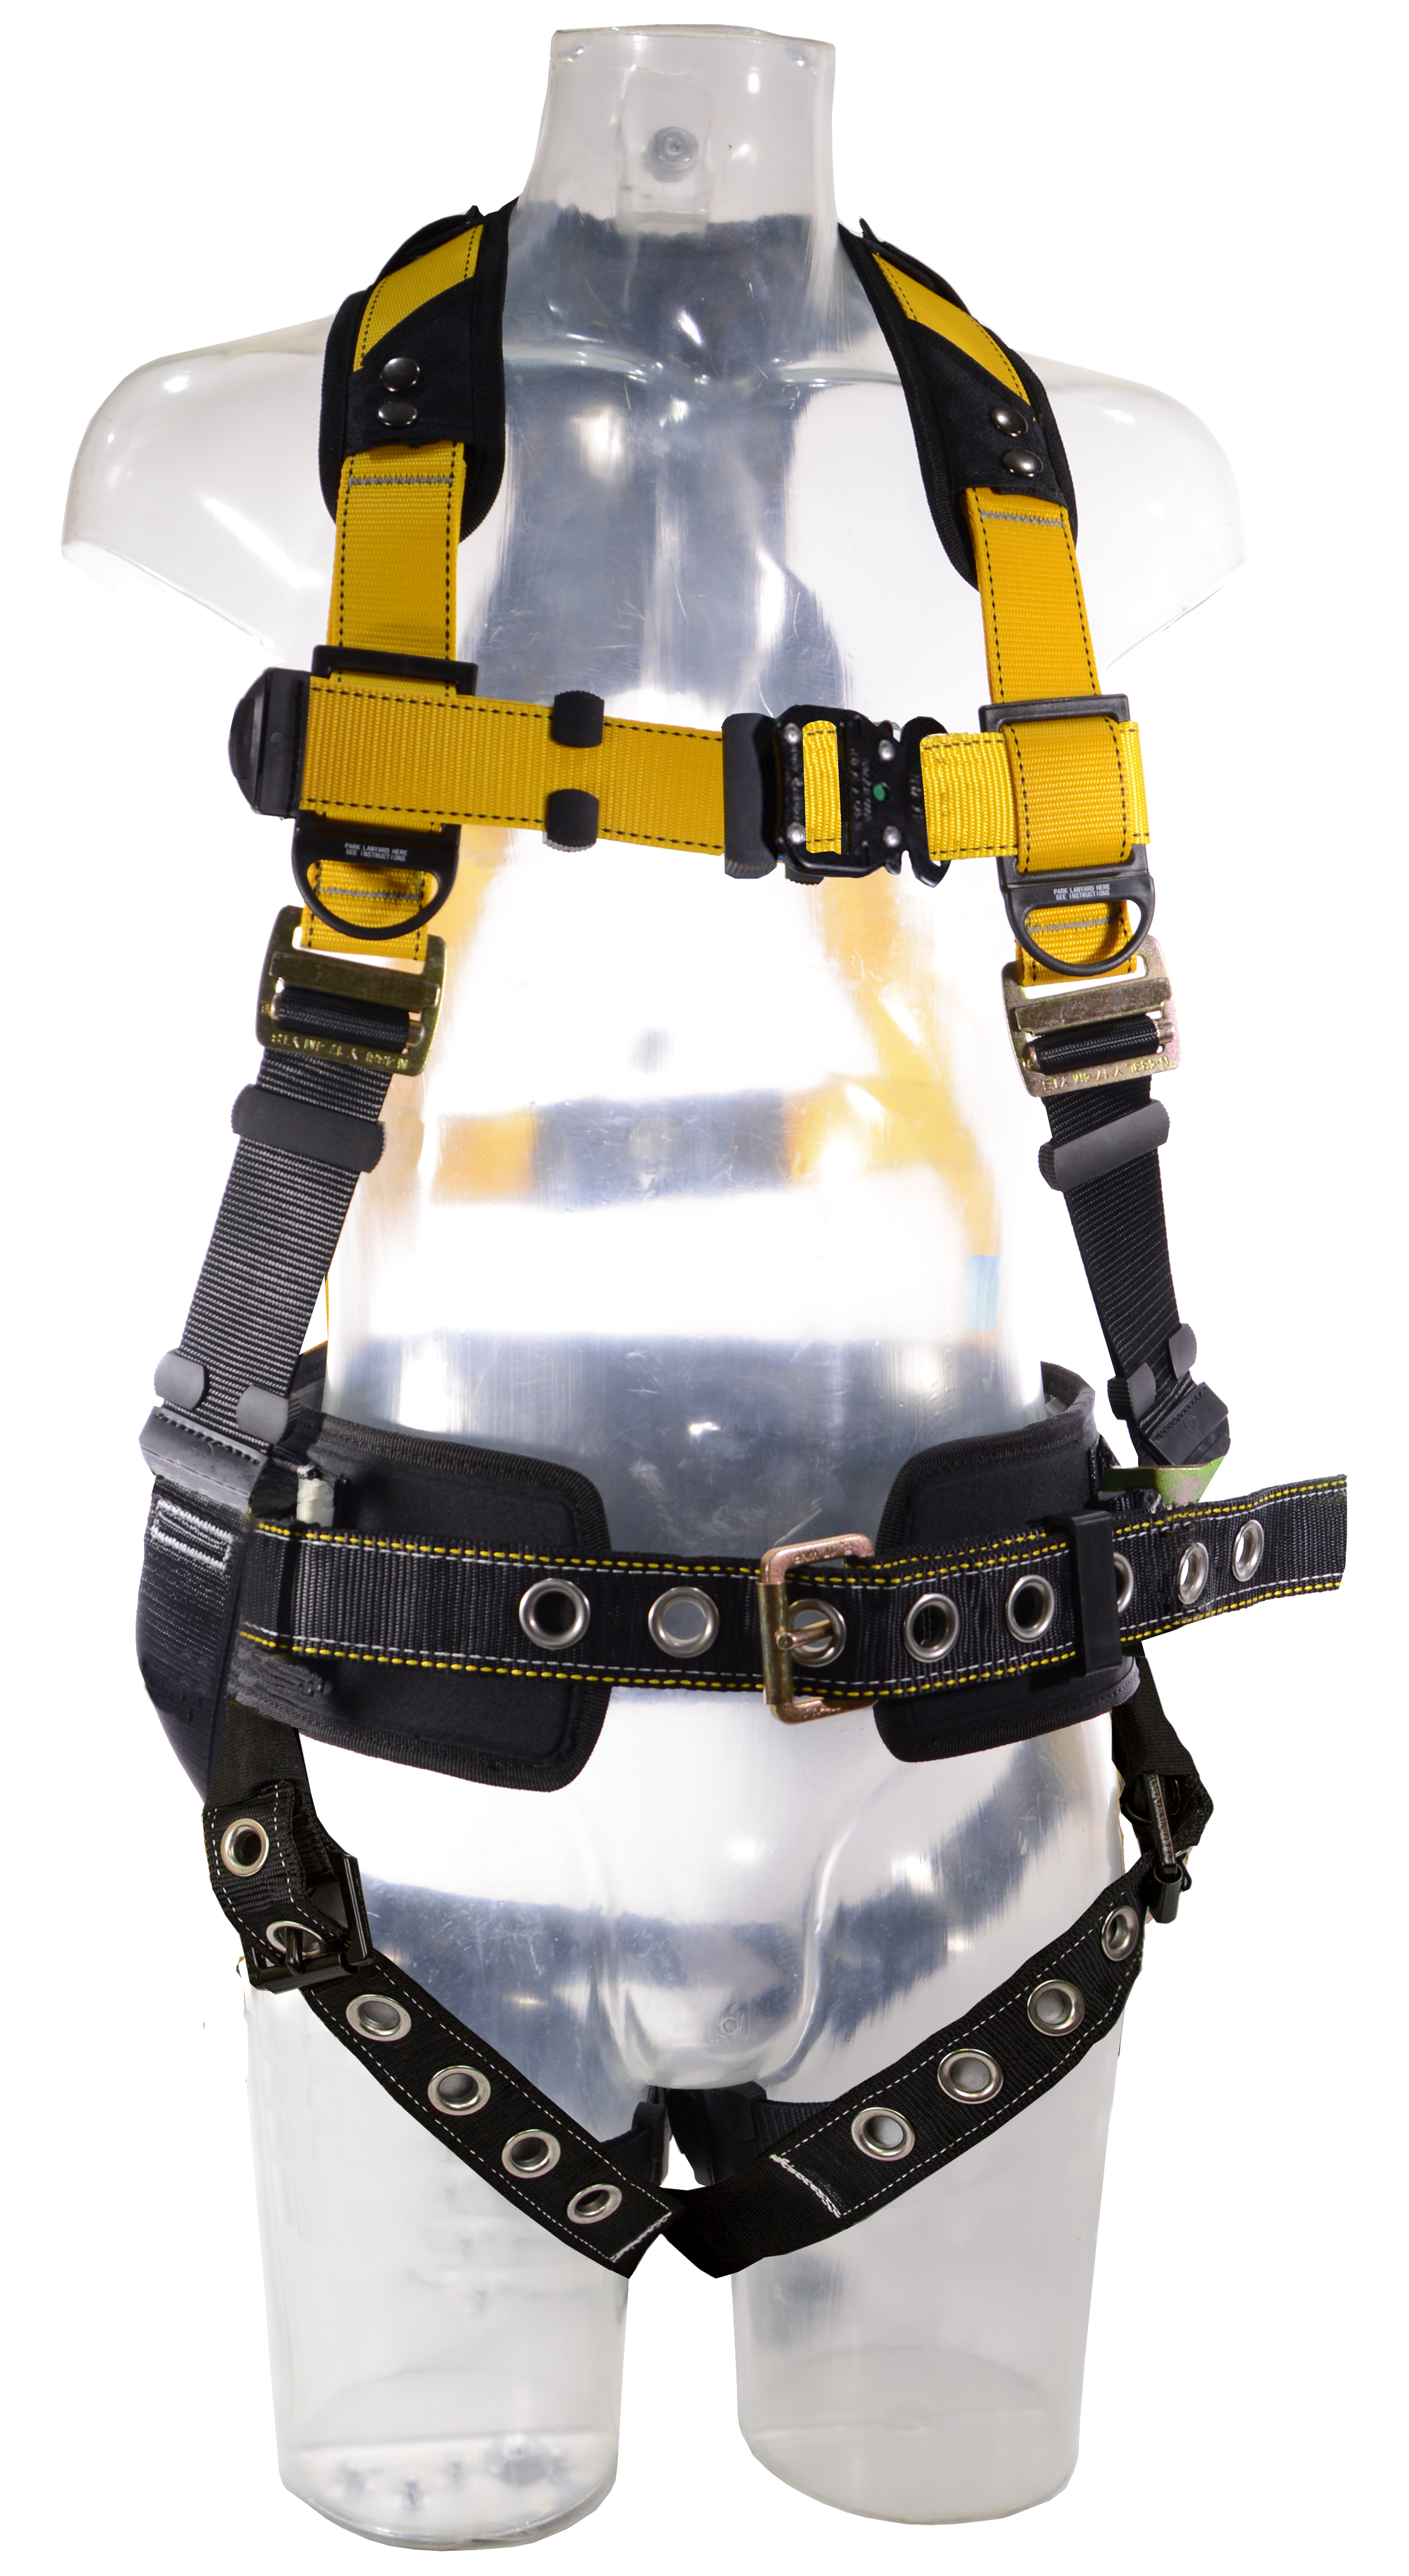 https://www.engineeredfallprotection.com/store/images/thumbs/0000106_guardian-series-3-full-body-harness-w-waist-pad-quick-connect-chest-tongue-buckle-legs.png